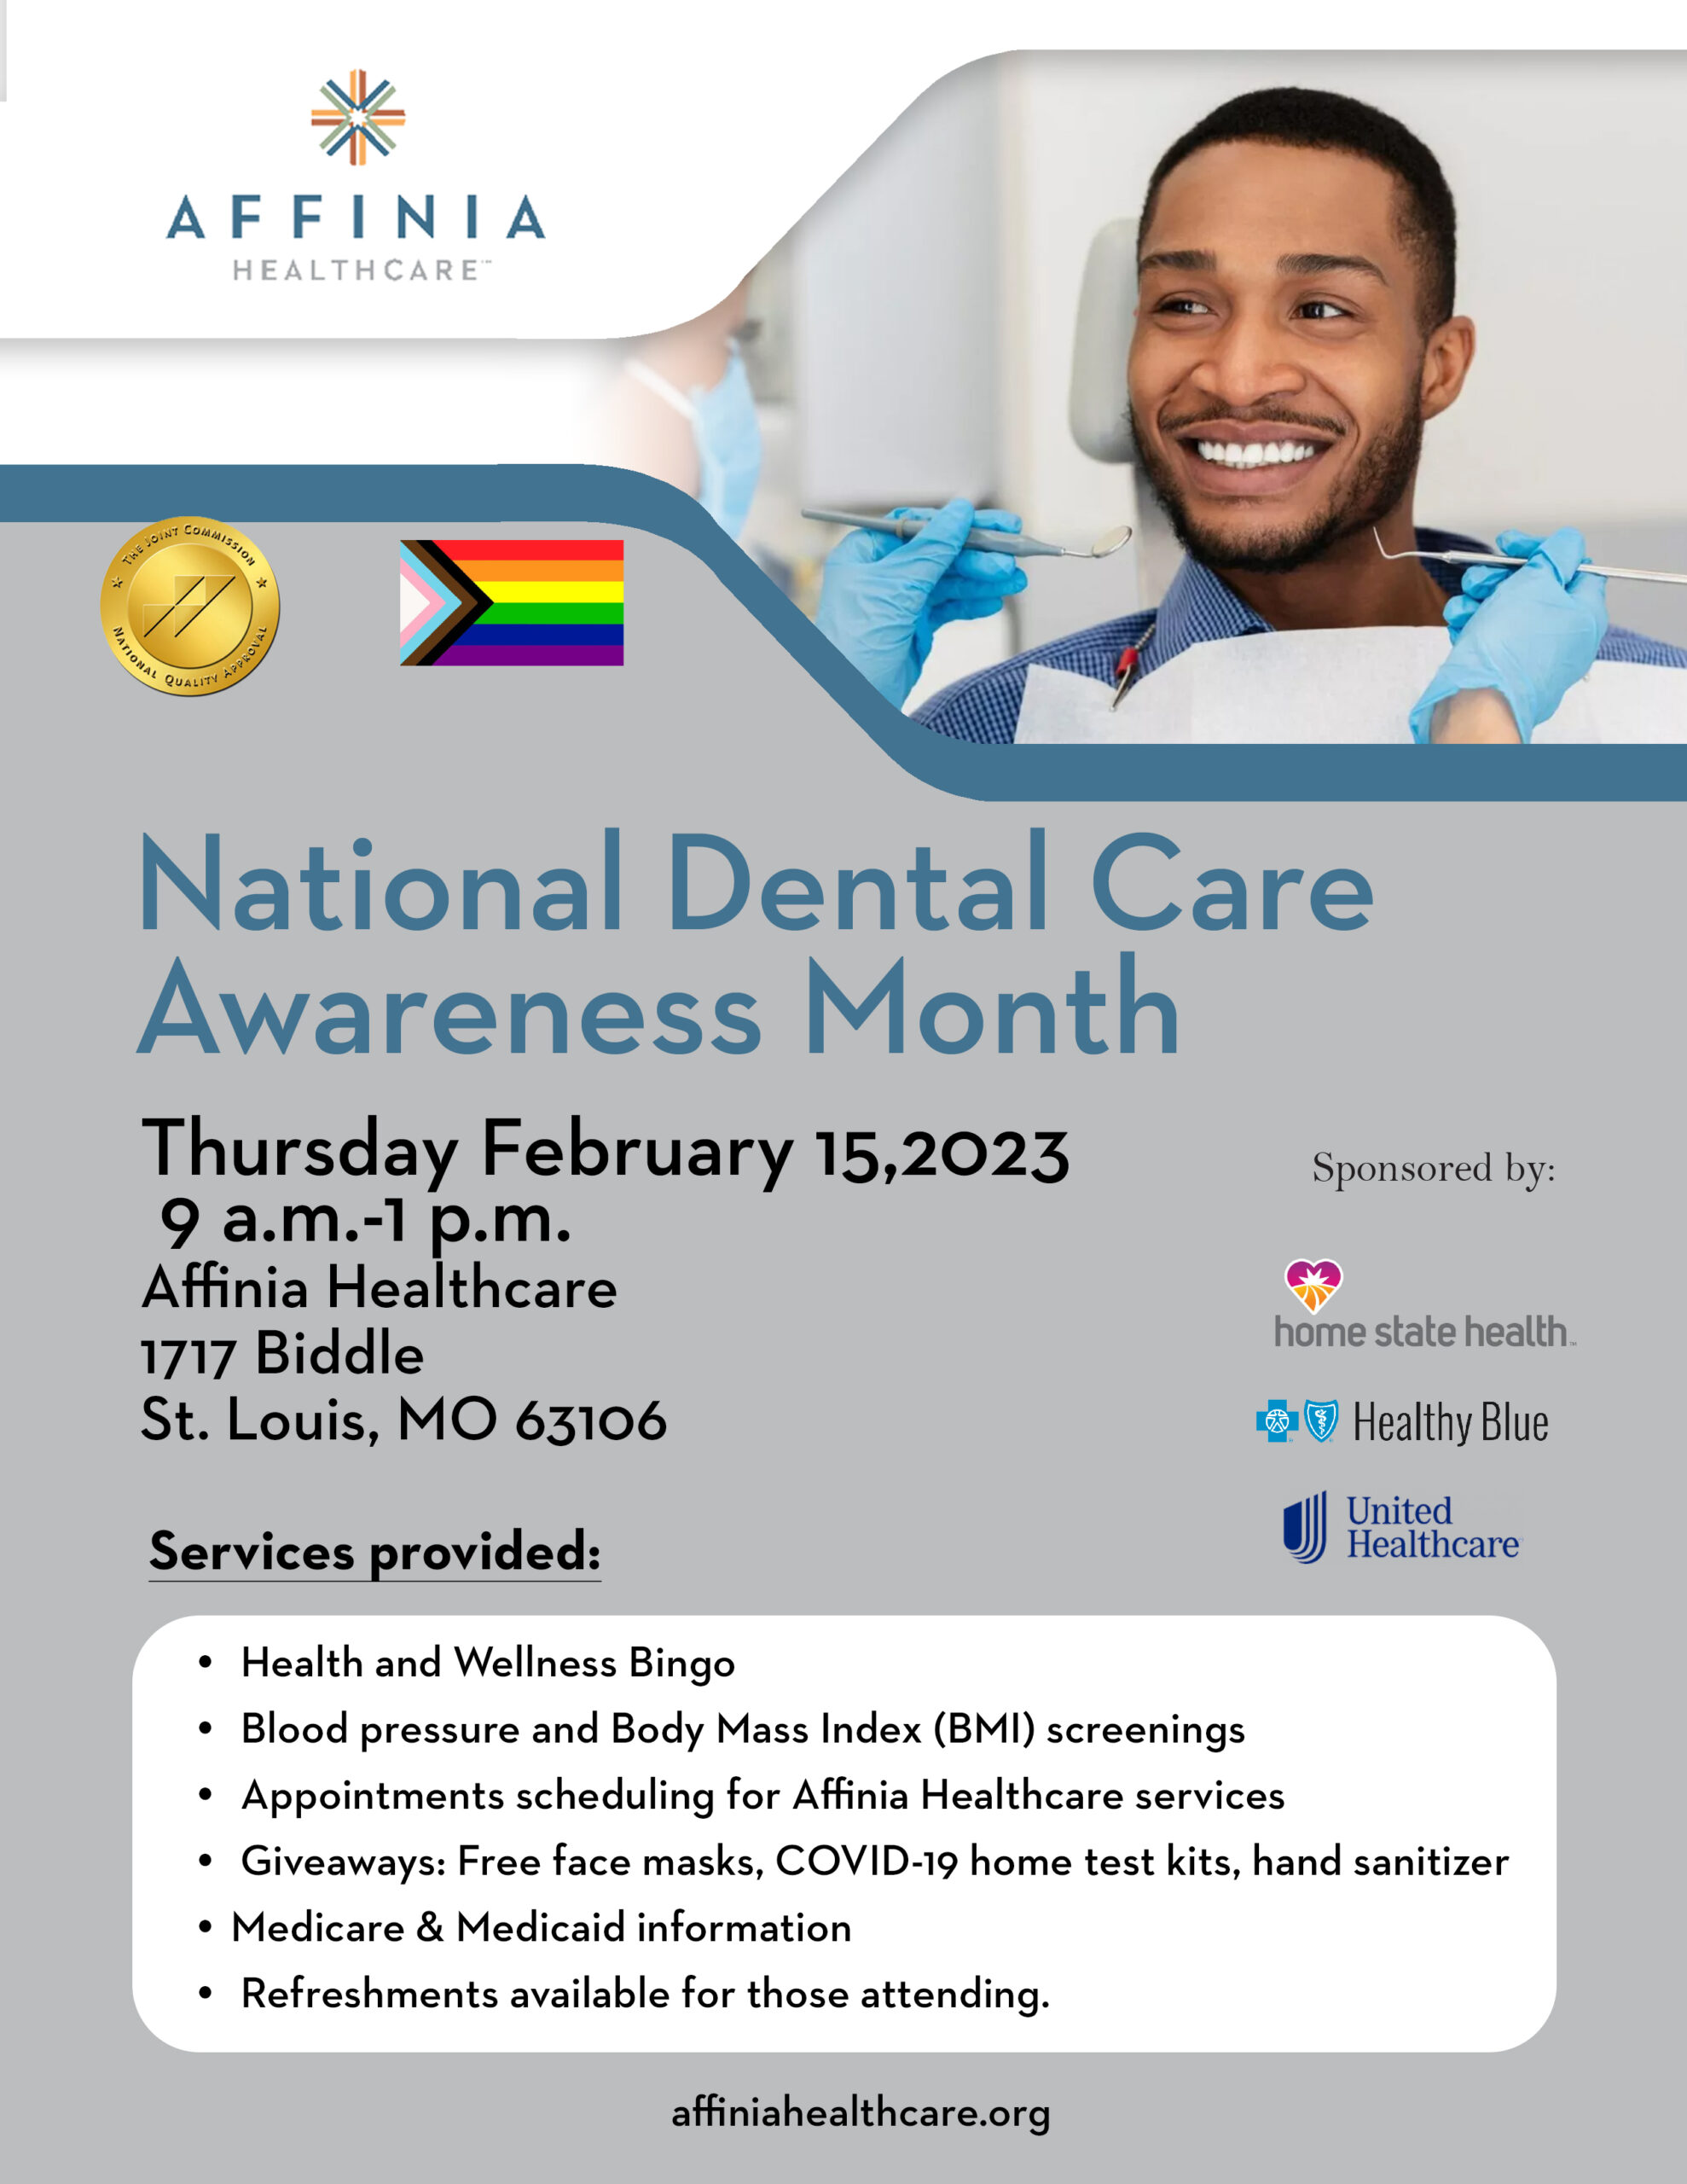 national dental awareness month event feb 15 at Biddle location